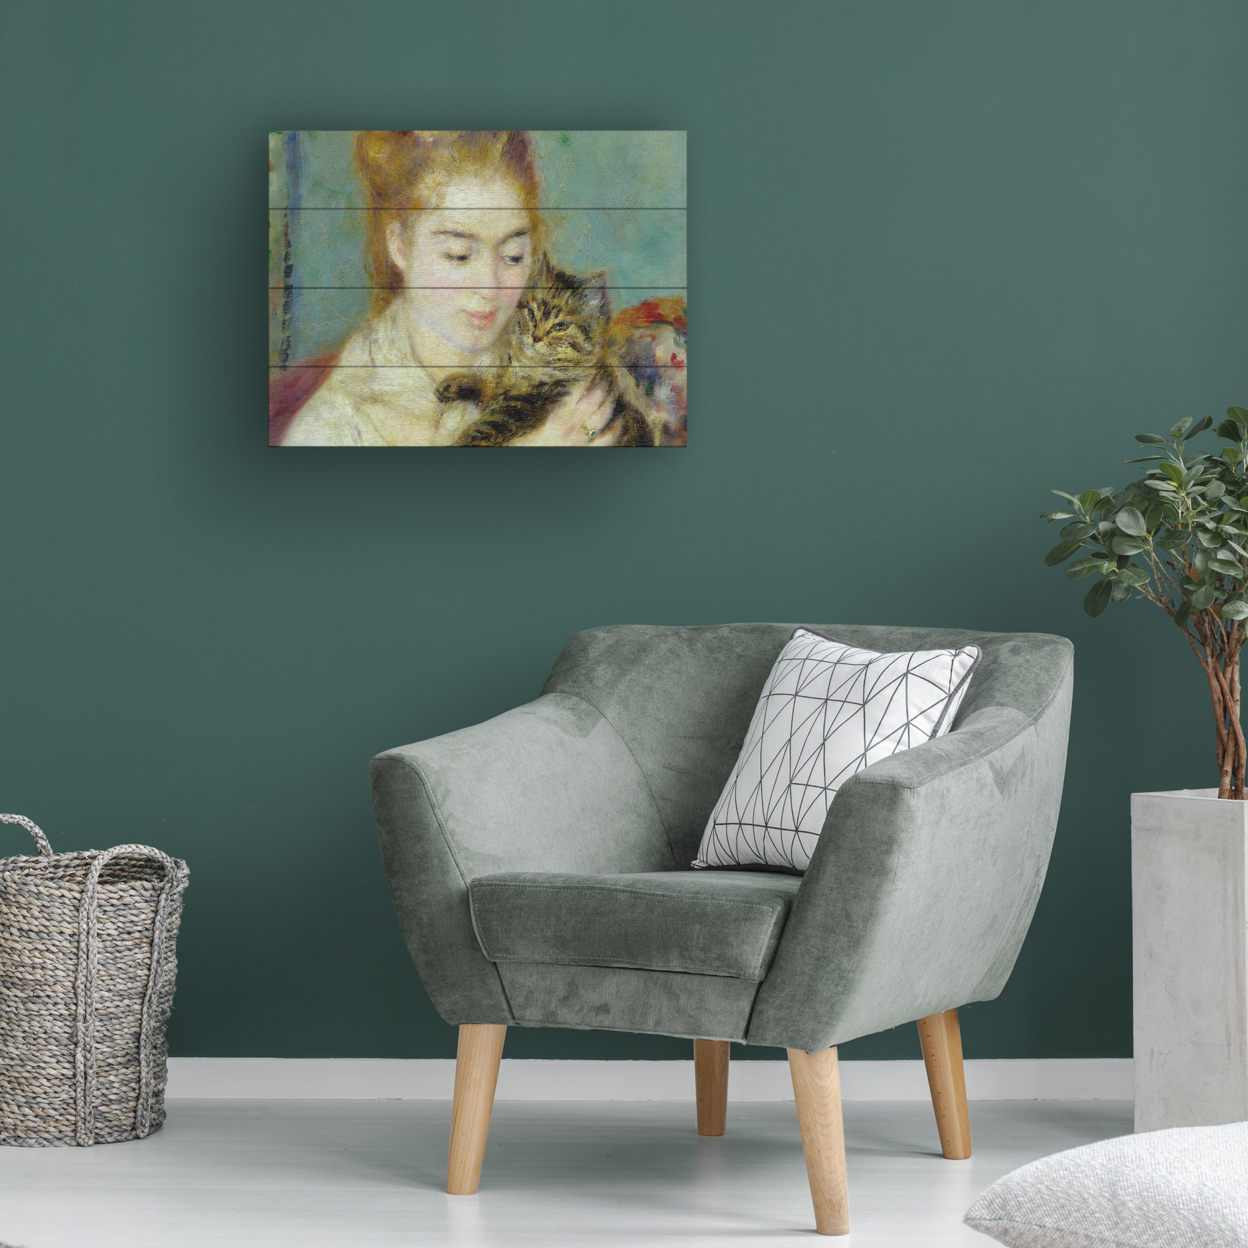 Wall Art 12 X 16 Inches Titled Woman With A Cat 1875 Ready To Hang Printed On Wooden Planks